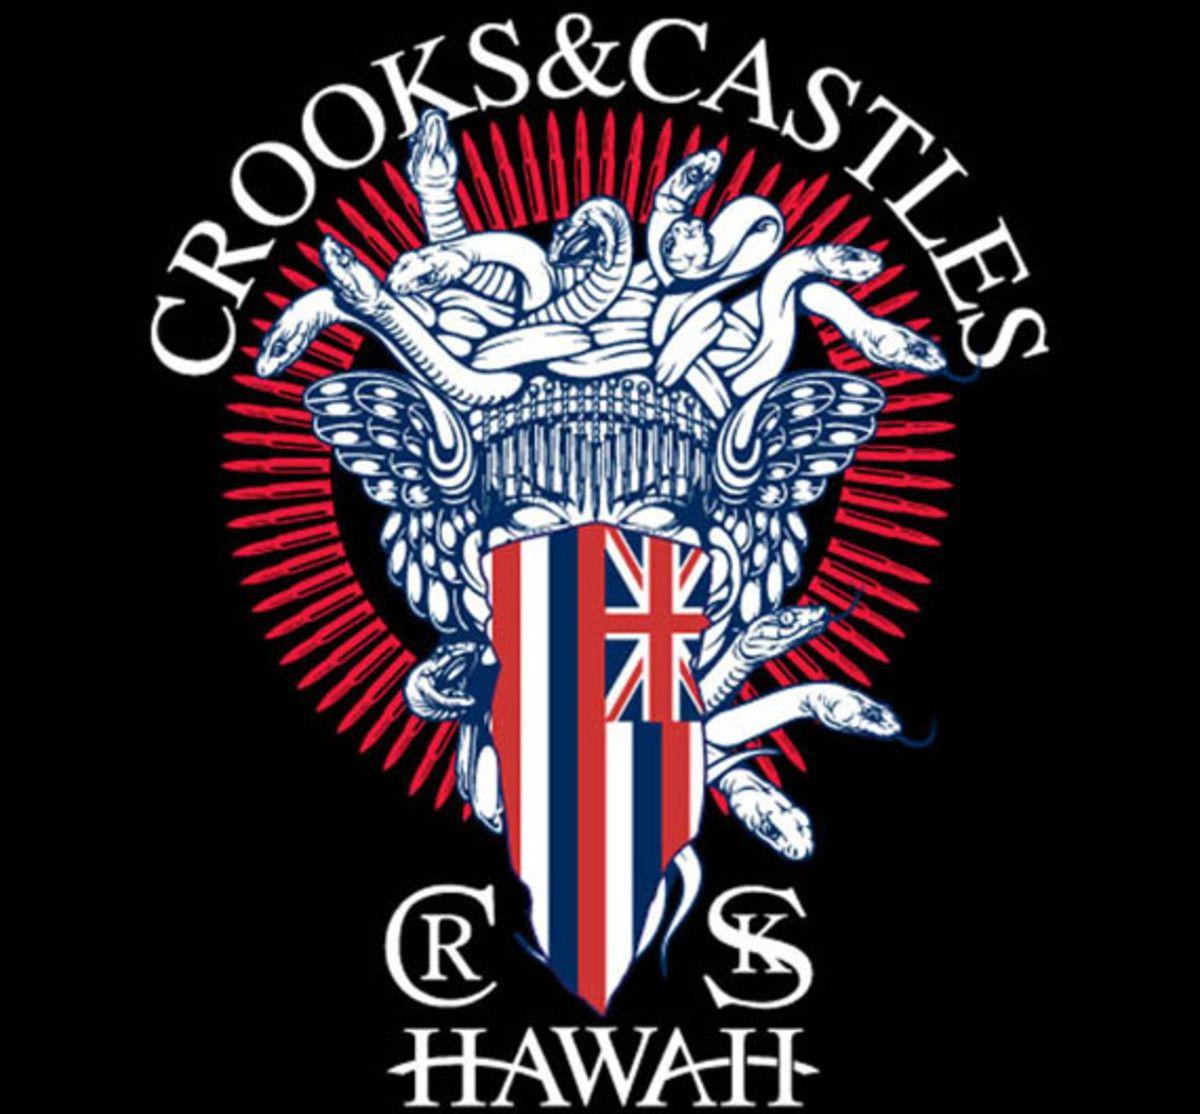 A L Crooks and Castles Logo - Crooks & Castles – Hawaii Store Exclusives + Opening - Freshness Mag